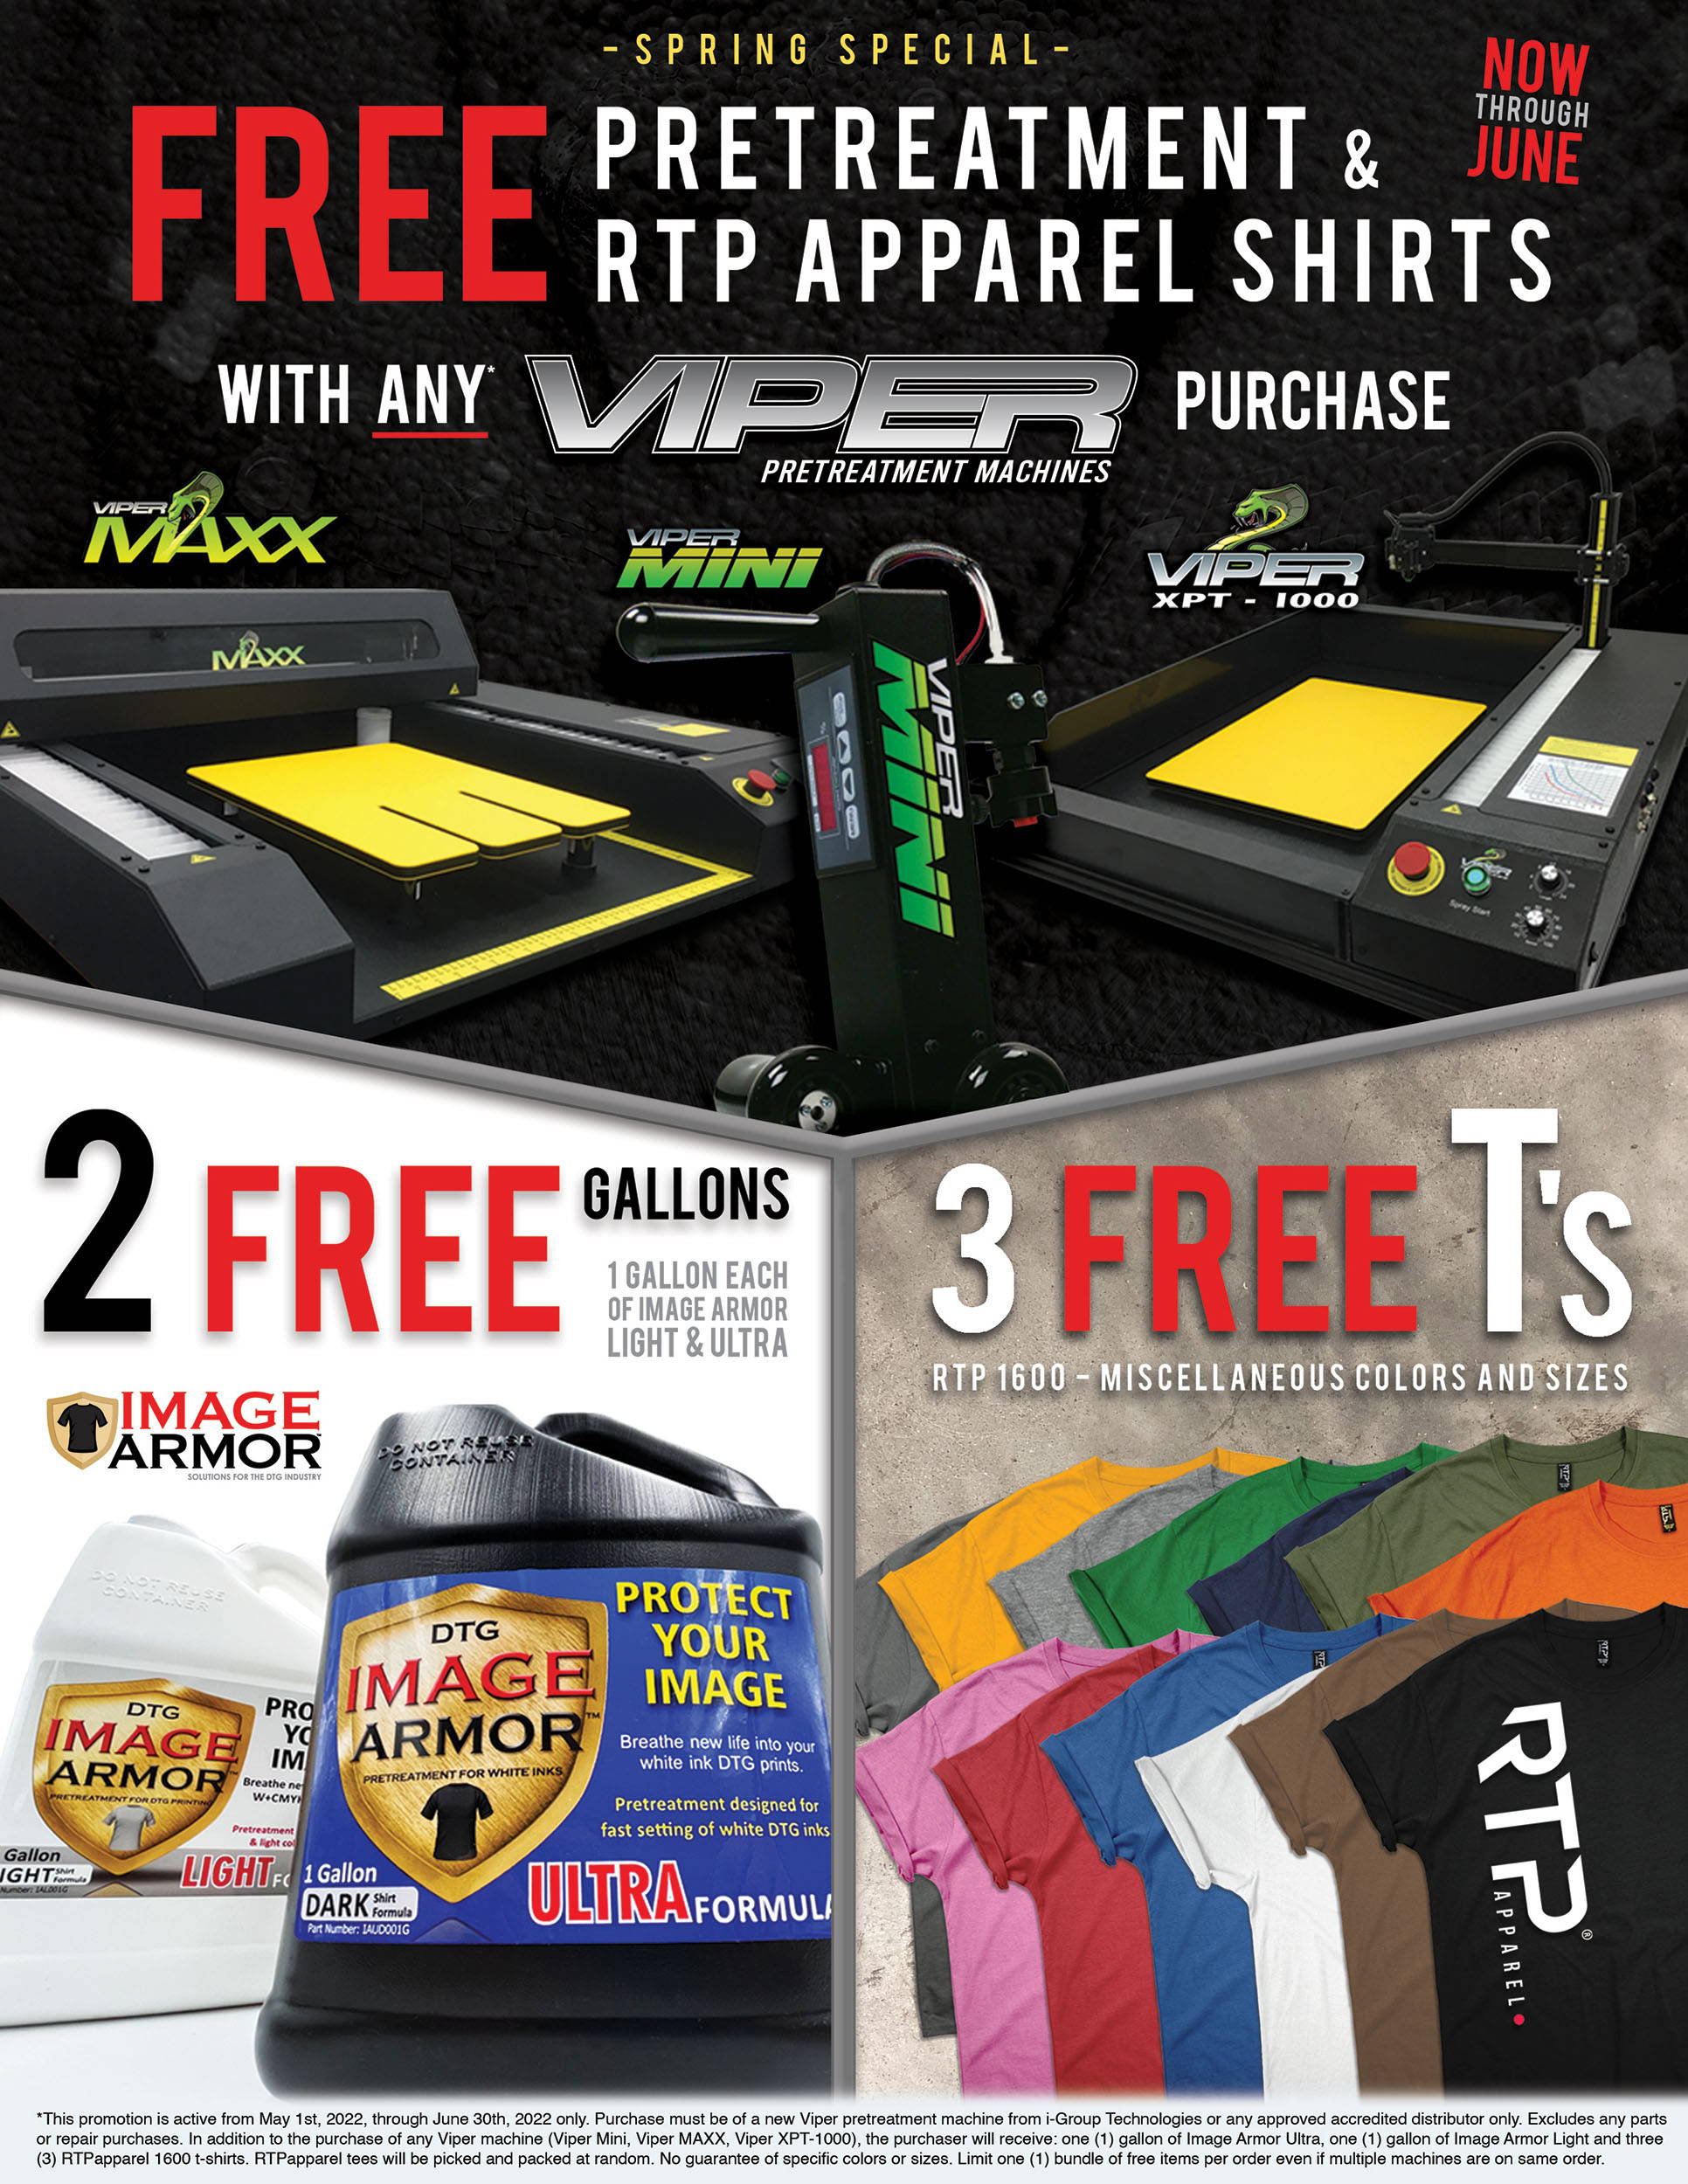 -Spring Special- Now through June. FREE Pretreatment & RTP Apparel Shirts with any Viper Pretreatment Machine purchase. 2 Free Gallons (1 Gallon Each) of Image Armor and Light & Ultra. 3 Free T's (RTP 1600 - Miscellaneous Colors and Sizes). 